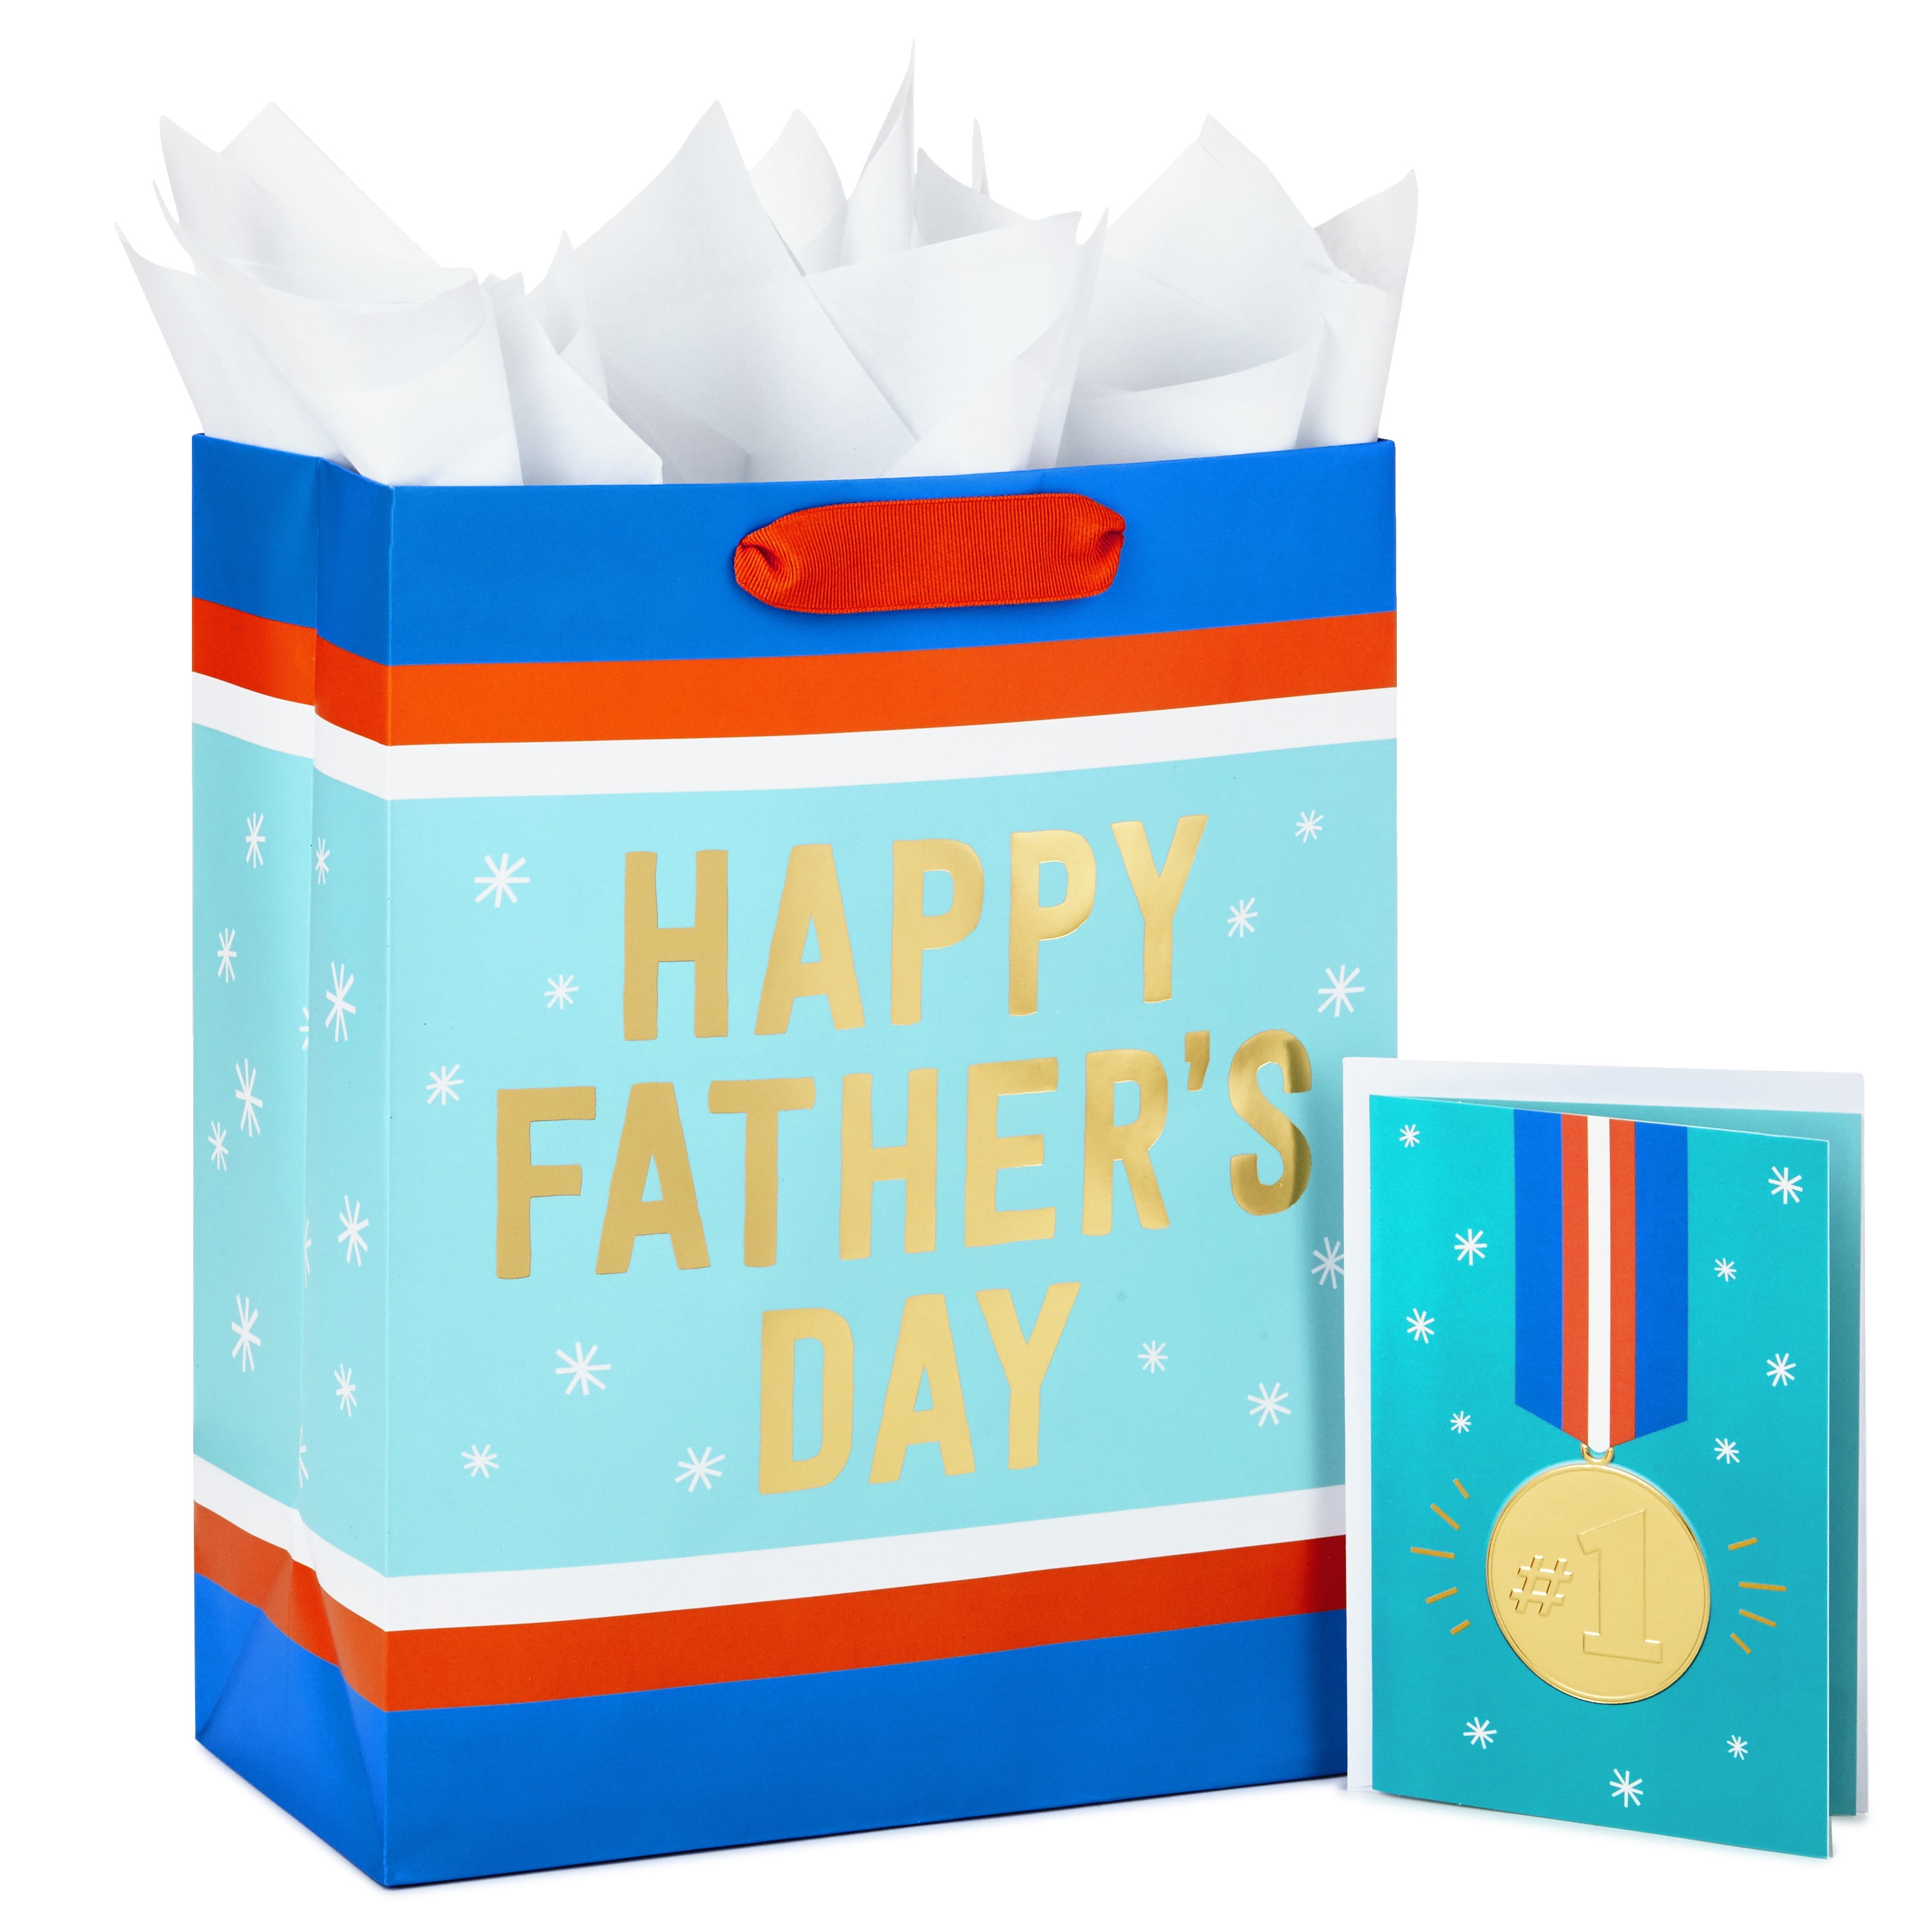 Bulk Wholesale 25 HAPPY FATHERS DAY Banners Card Making Craft Embellishments 